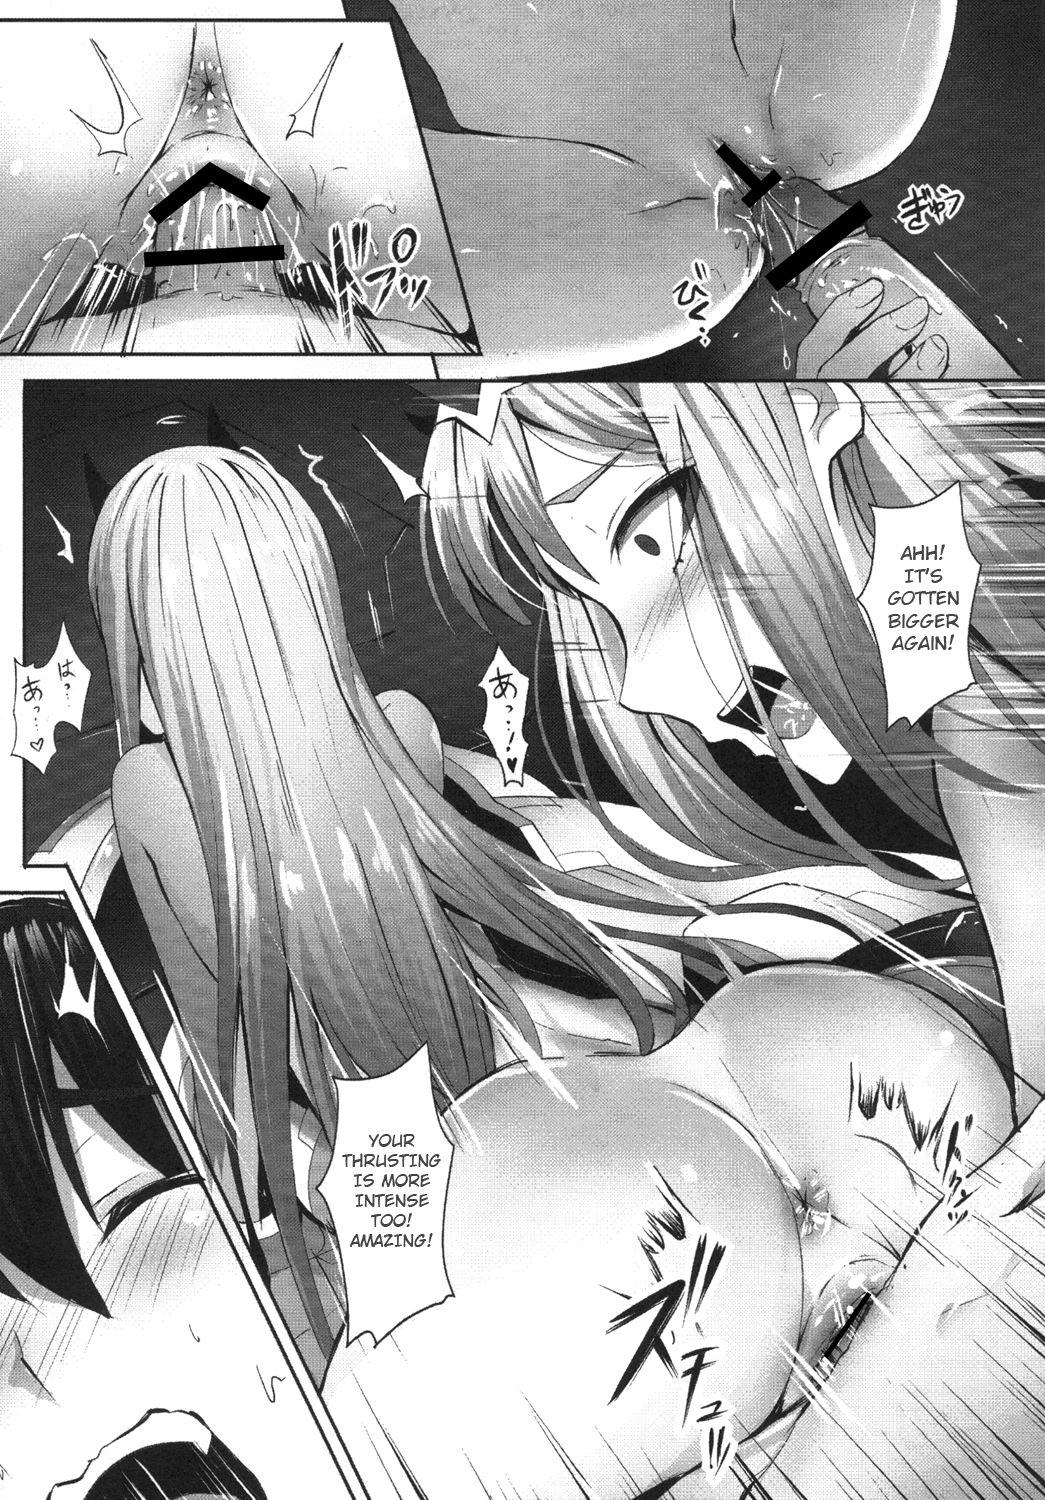 Matures Darling need more Sexx - Darling in the franxx Gay Medic - Page 6